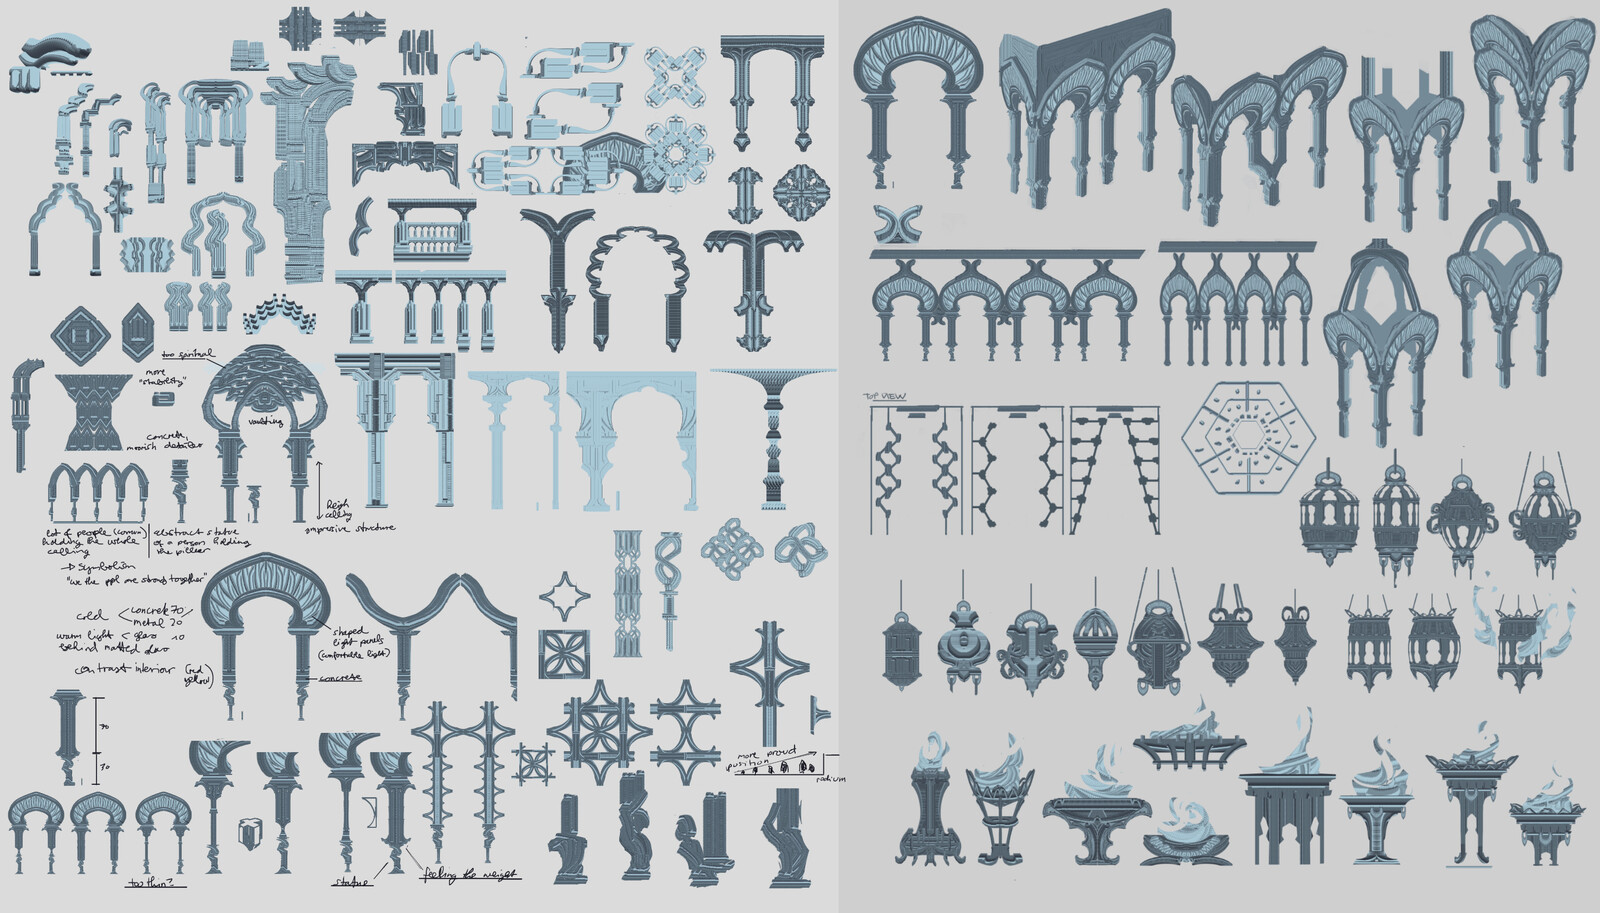 Left: Design exploration / Right: Several sketches for assets used in the scene